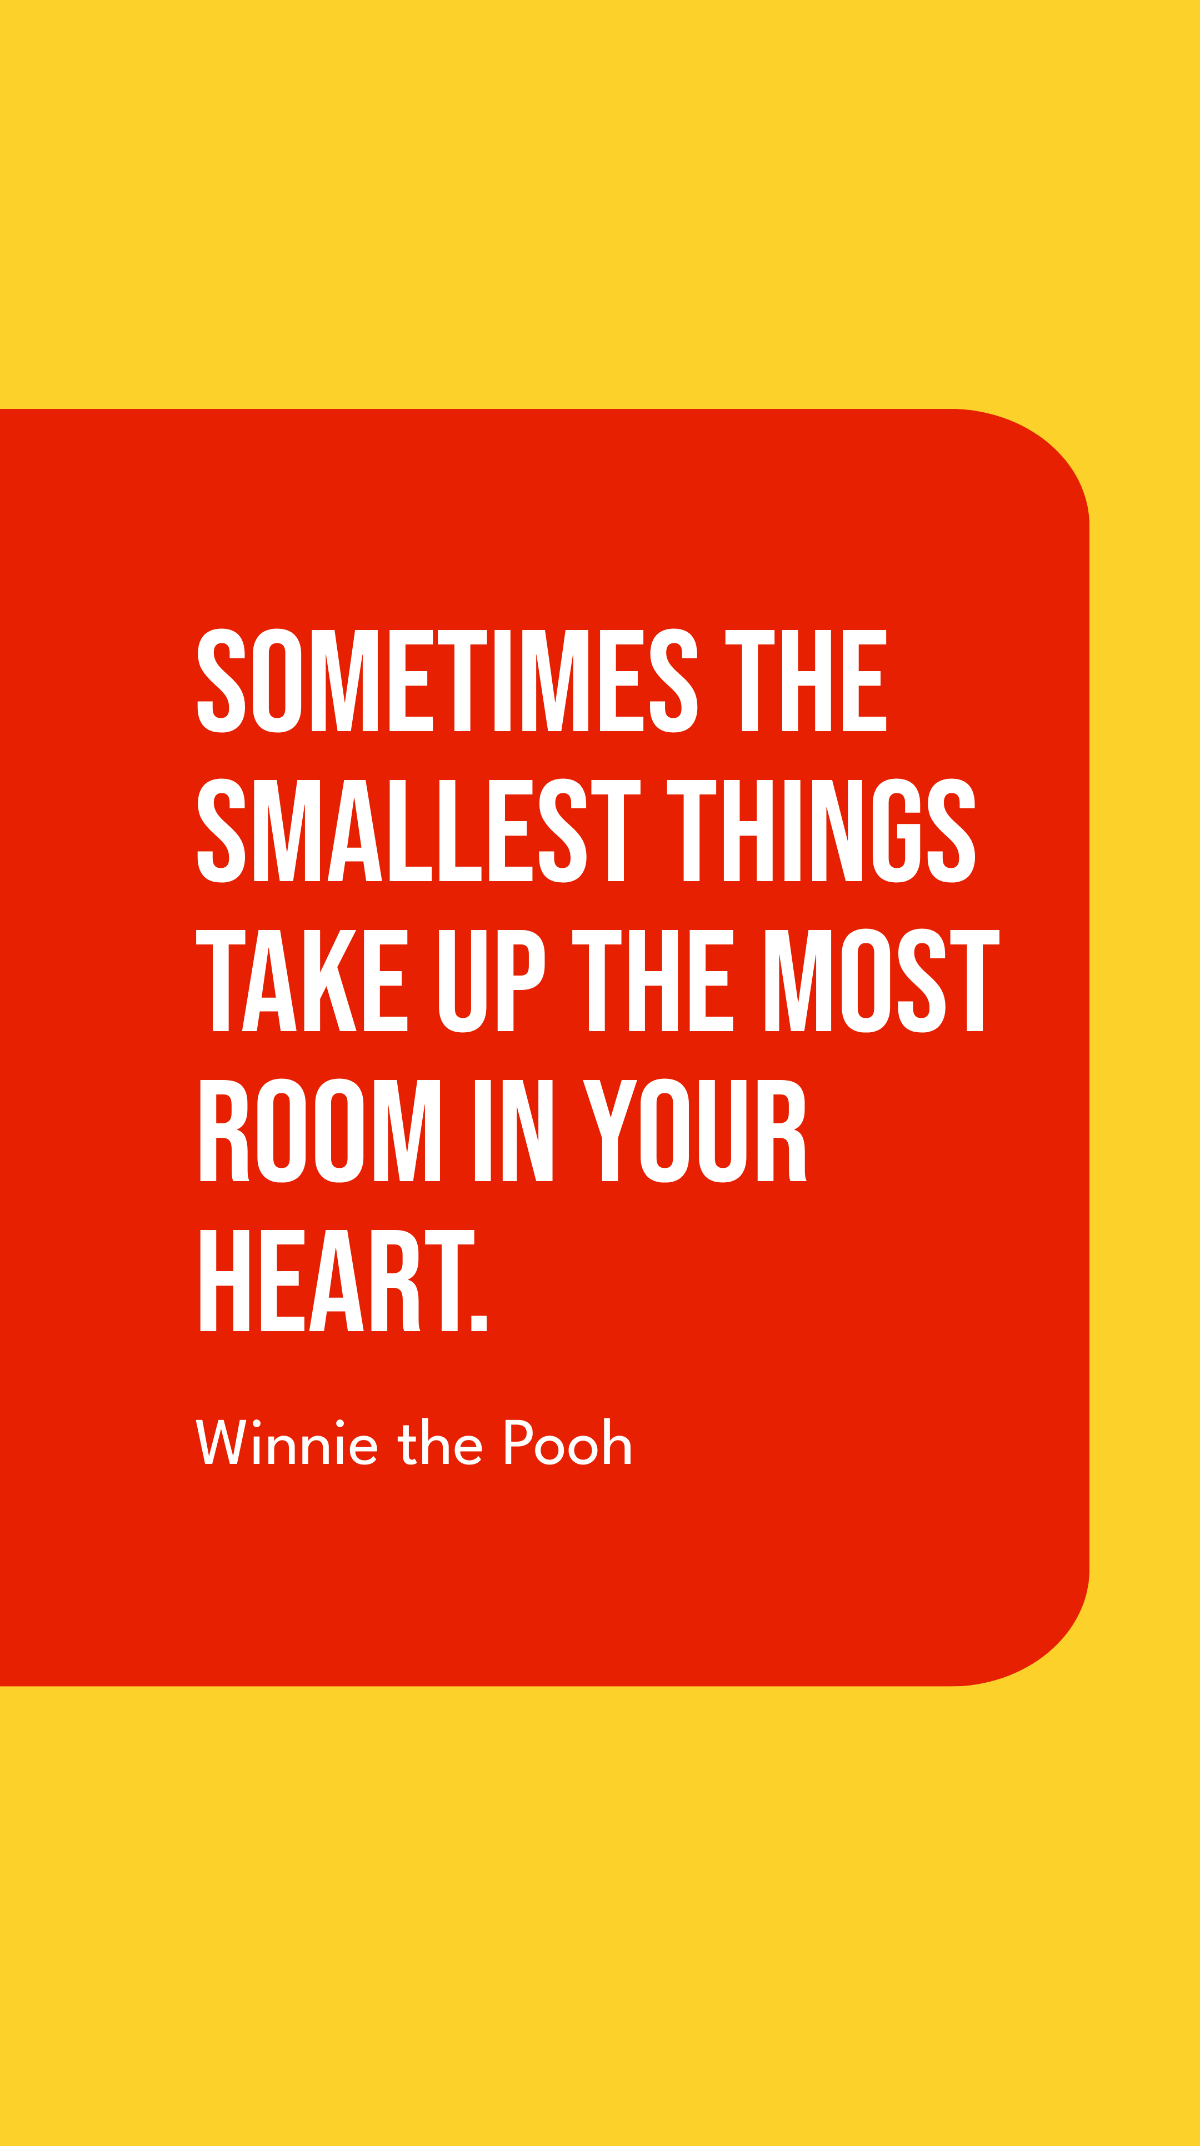 Free Winnie the Pooh - Sometimes the smallest things take up the most room in your heart. Template